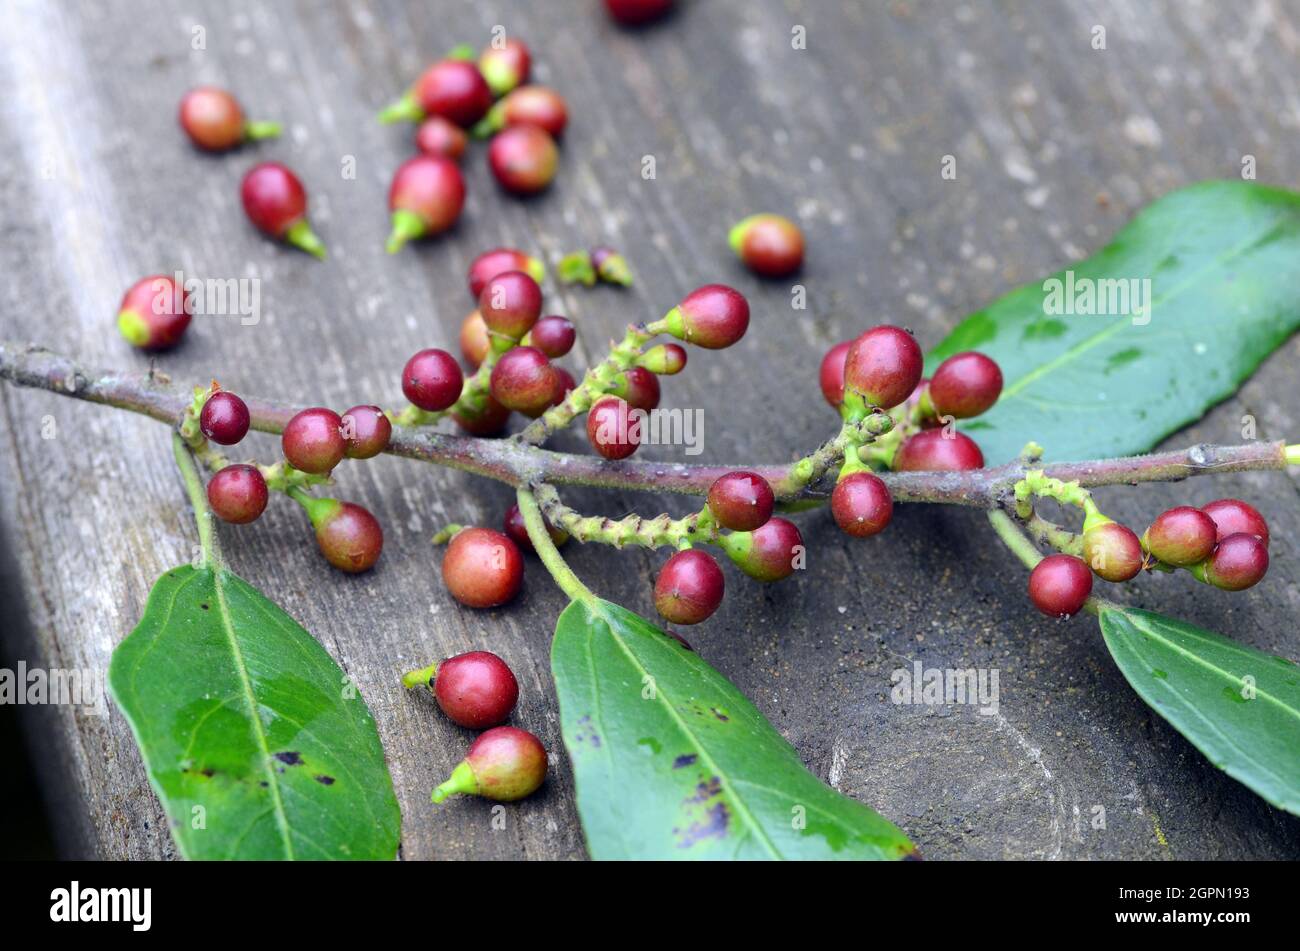 Medicinal plants. Branch of Rhamnus alaternus with fruits on a wooden board Stock Photo